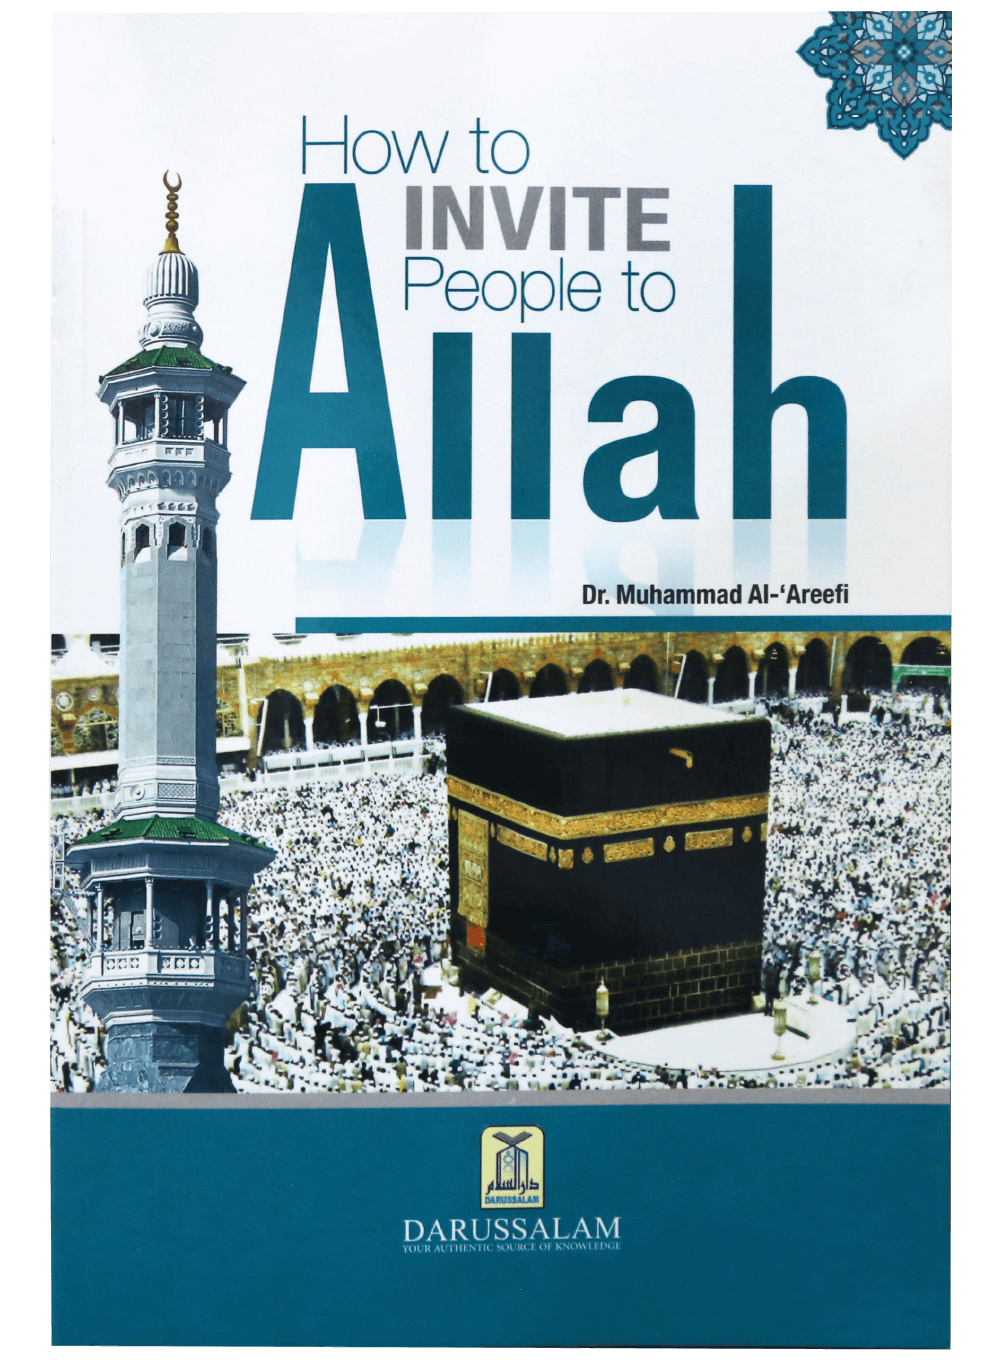 how-to-invite-people-to-allah-darussalam-20180420-152511